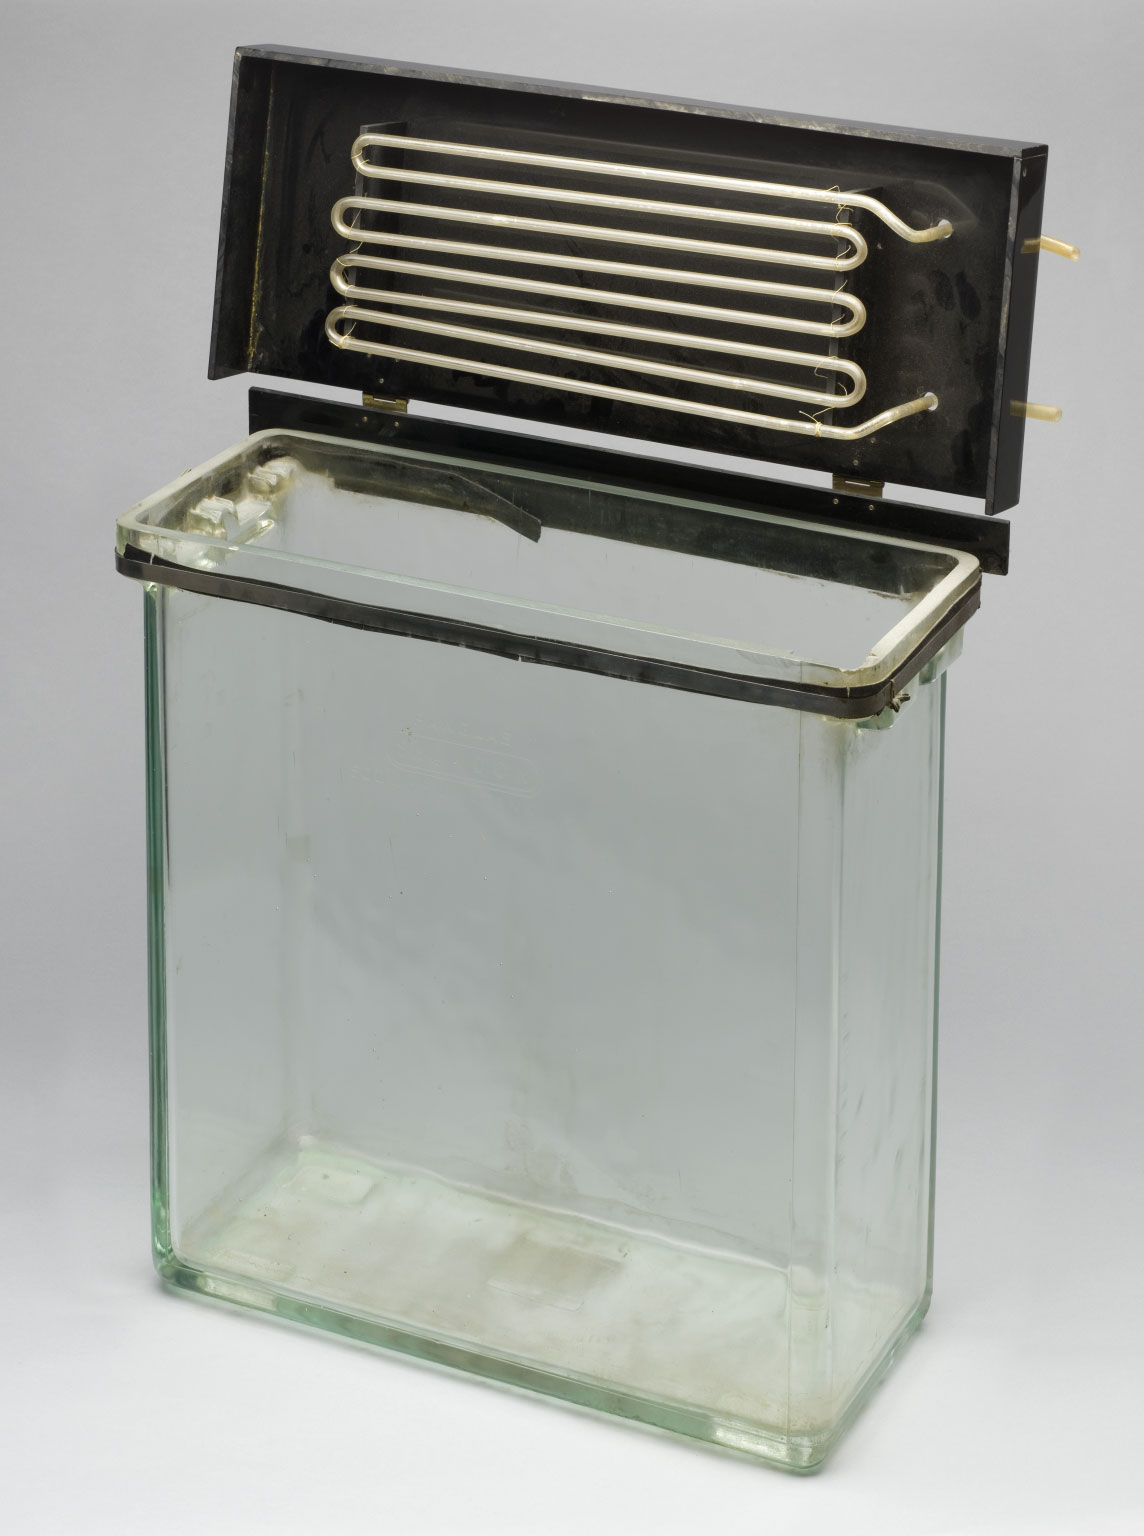 Frederick Sanger used this equipment to study the structure of insulin by electrophoresis in the 1950s. Credit: Science Museum